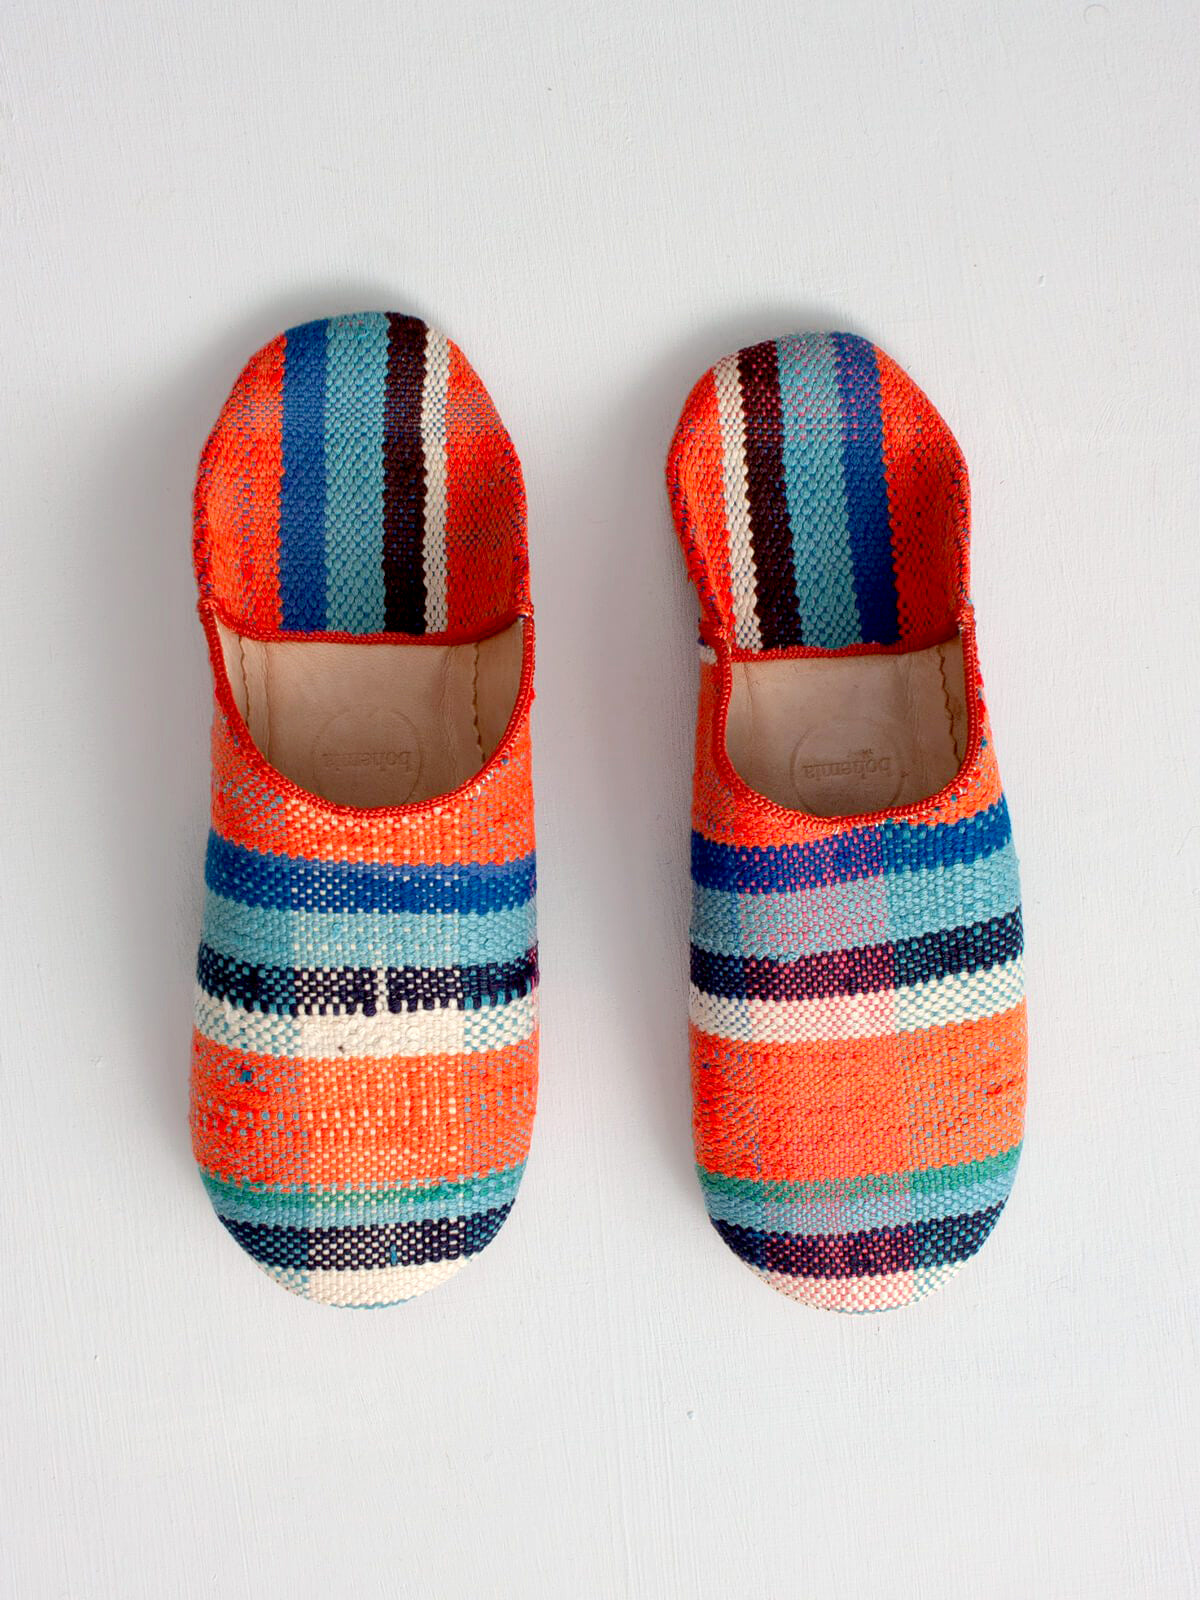 Moroccan Boujad Basic Babouche Slippers, Orange and Blue Check